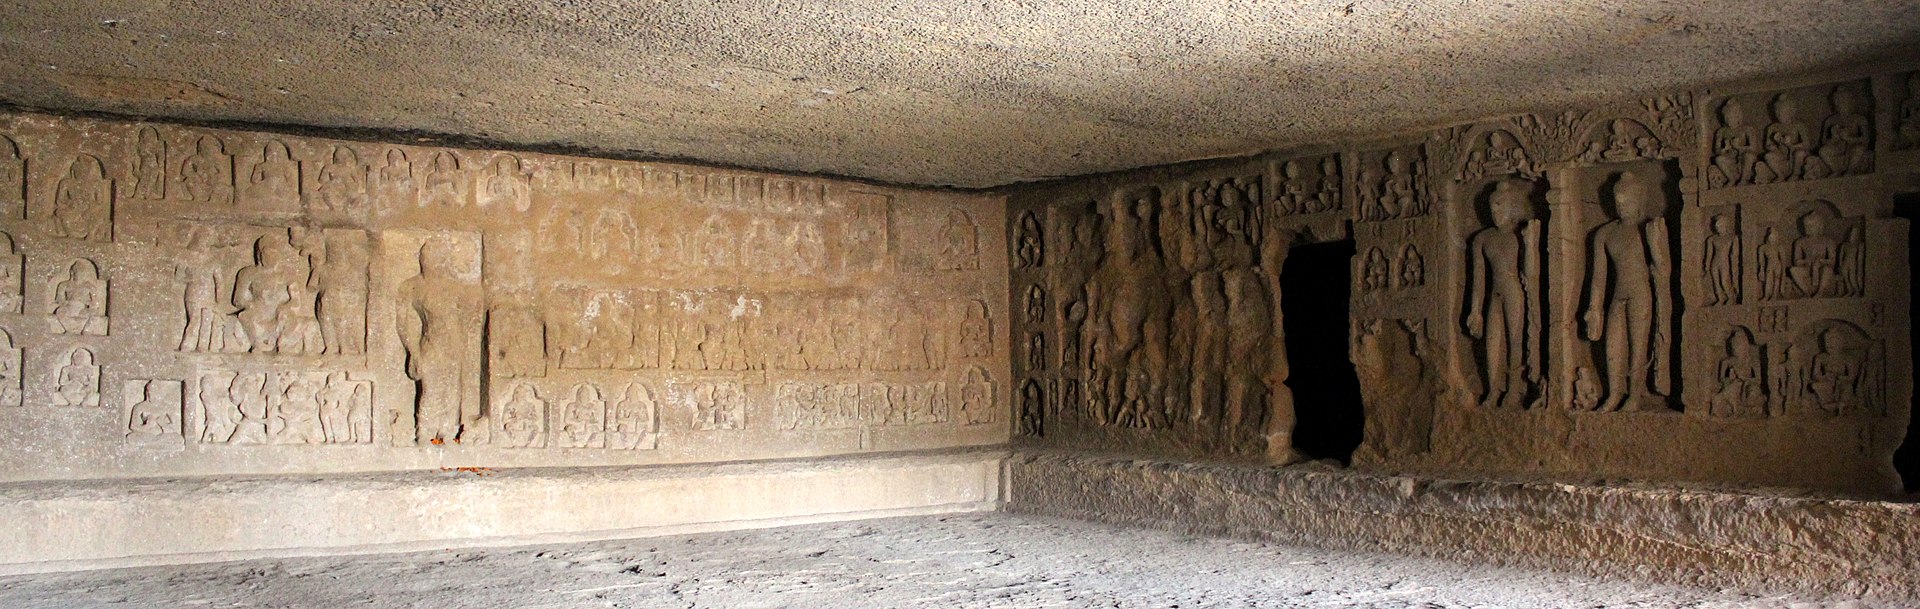 1920px-Kanheri_cave_90_back_and_right_sculpture_walls.jpg